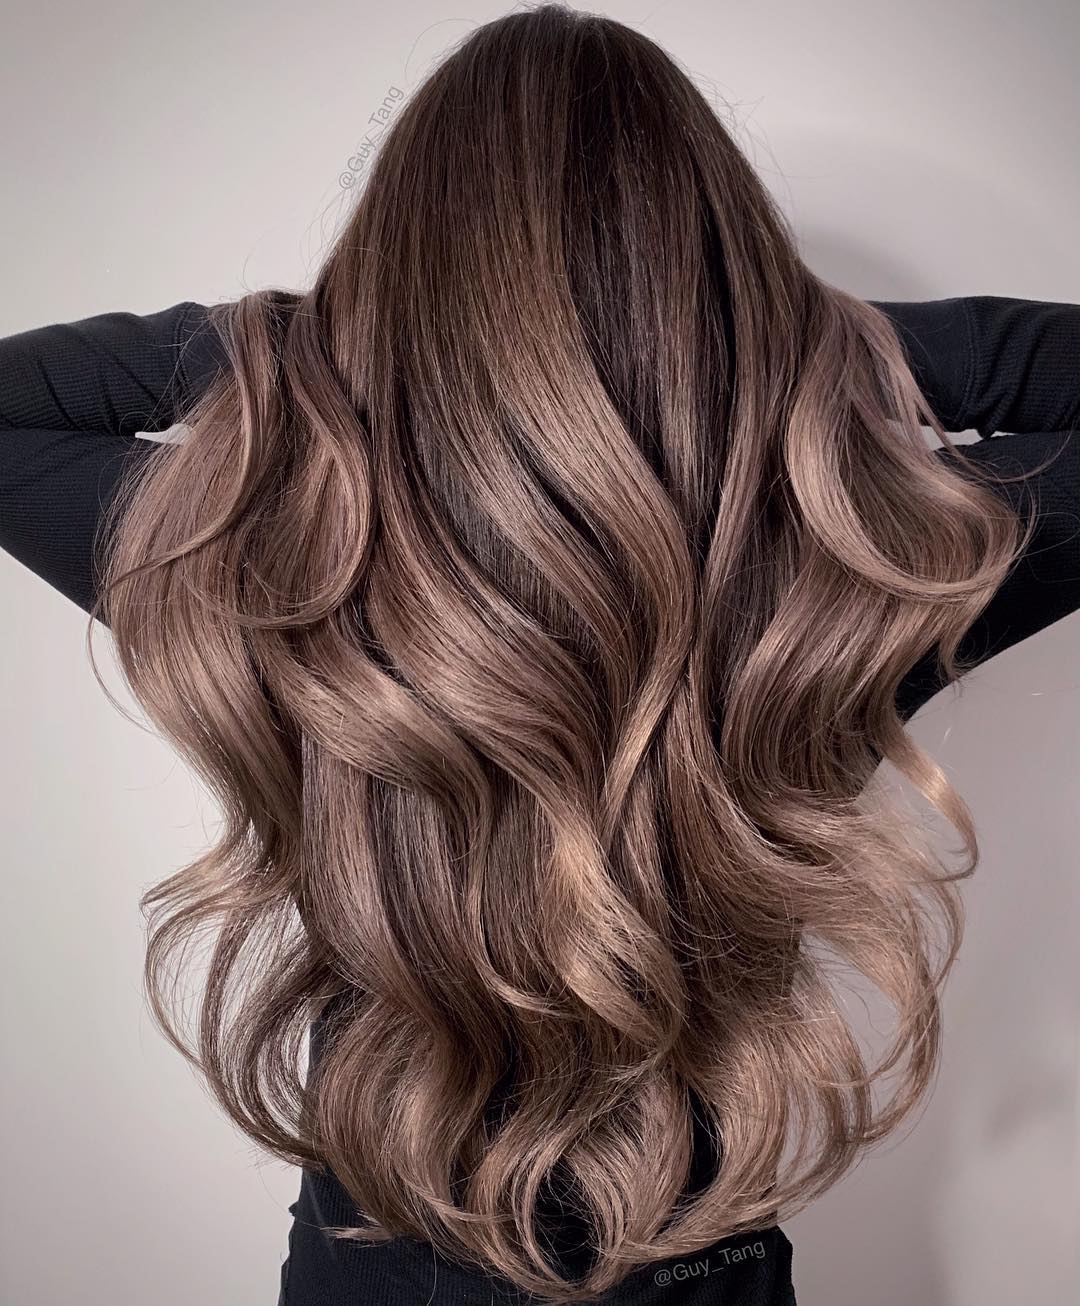 45 Hottest Balayage Hair Colors To Make Everyone Jealous In 2022